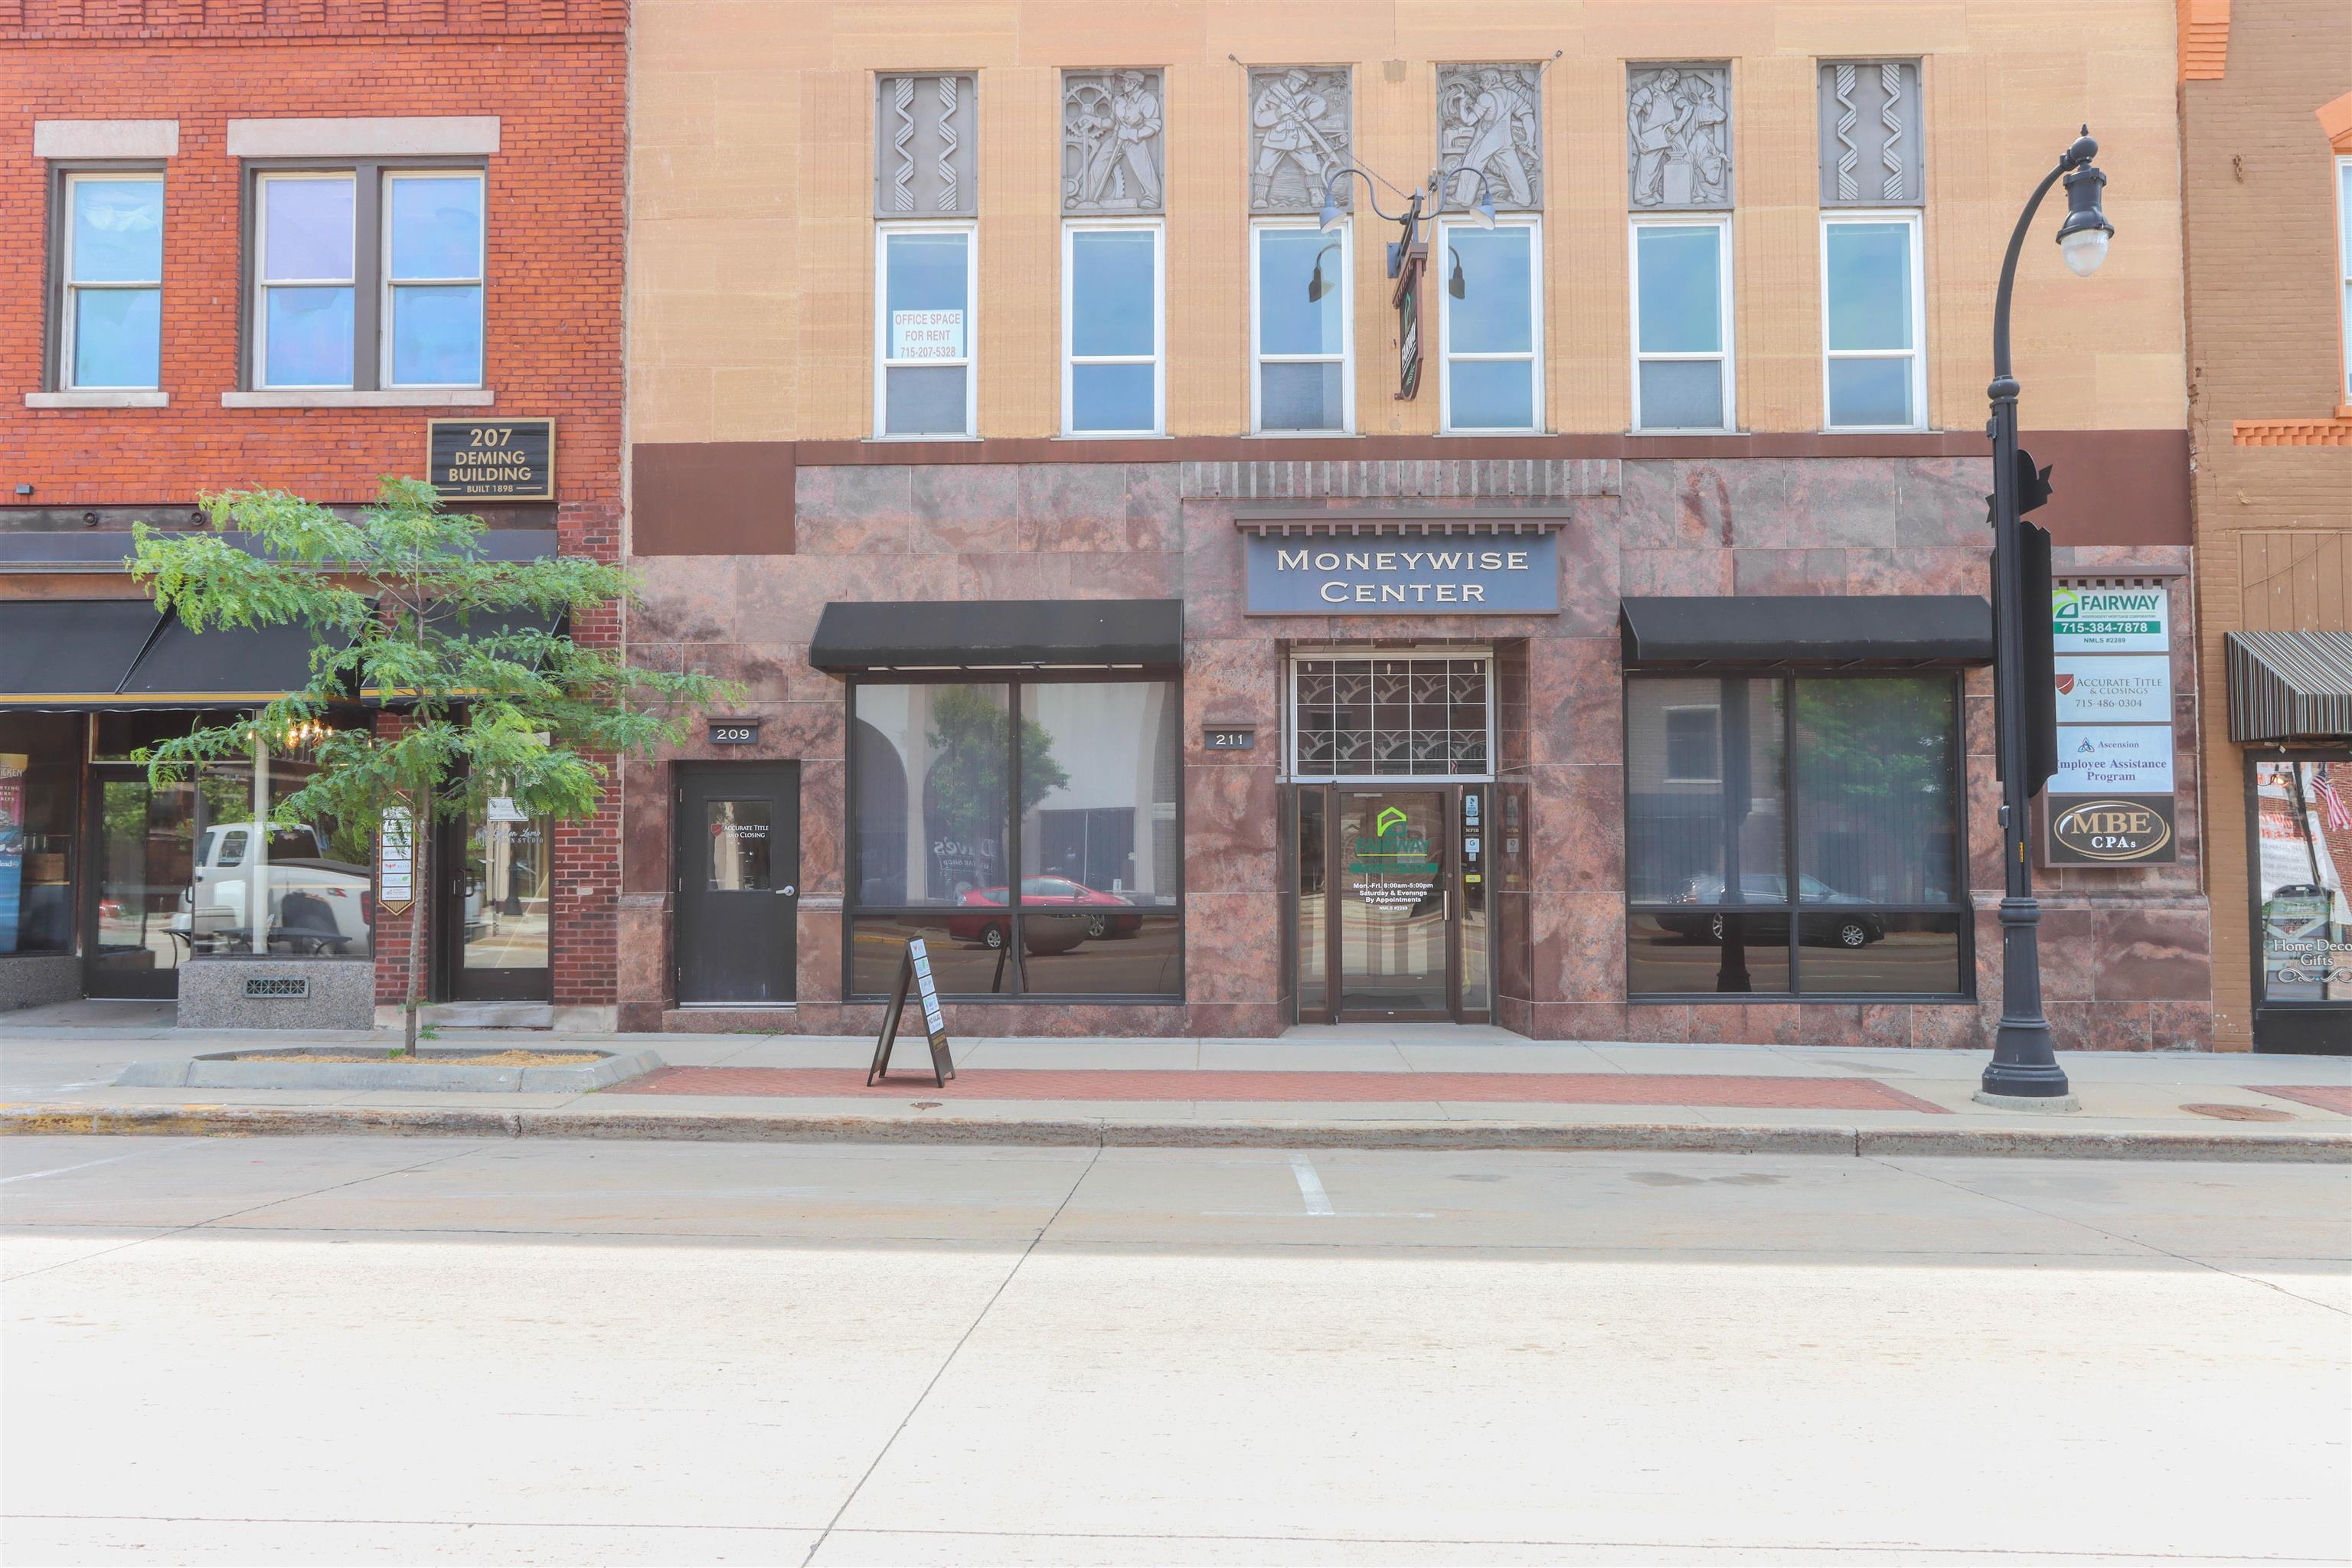 209 S CENTRAL AVENUE, Marshfield, Wisconsin 54449, ,Commercial/industrial,For Rent,209 S CENTRAL AVENUE,22401370